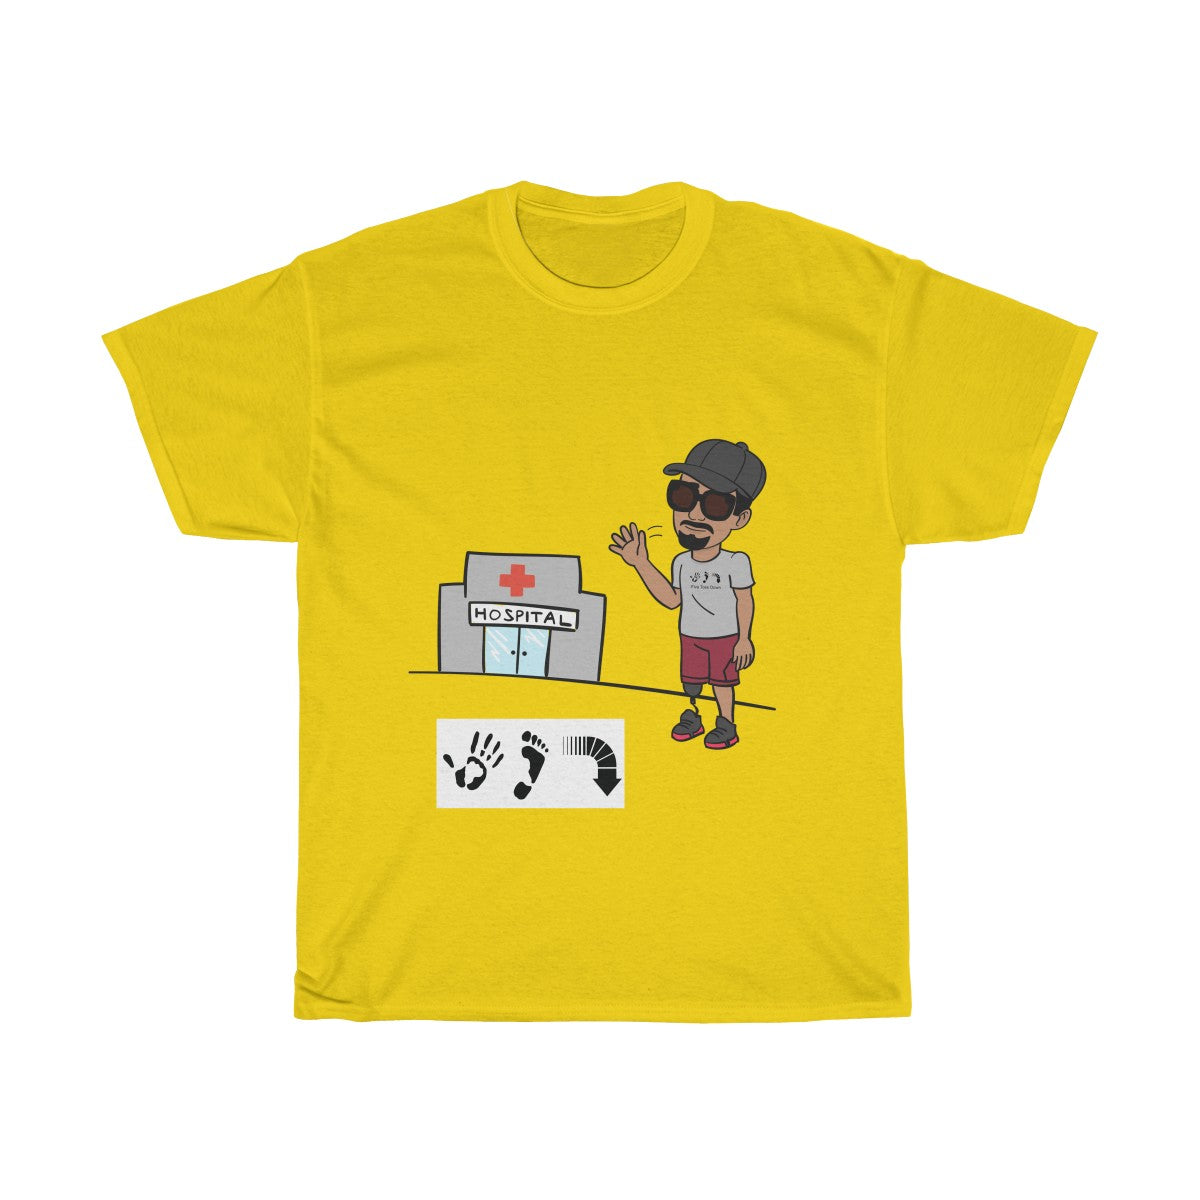 Five Toes Down Henry/Bye Cotton Tee